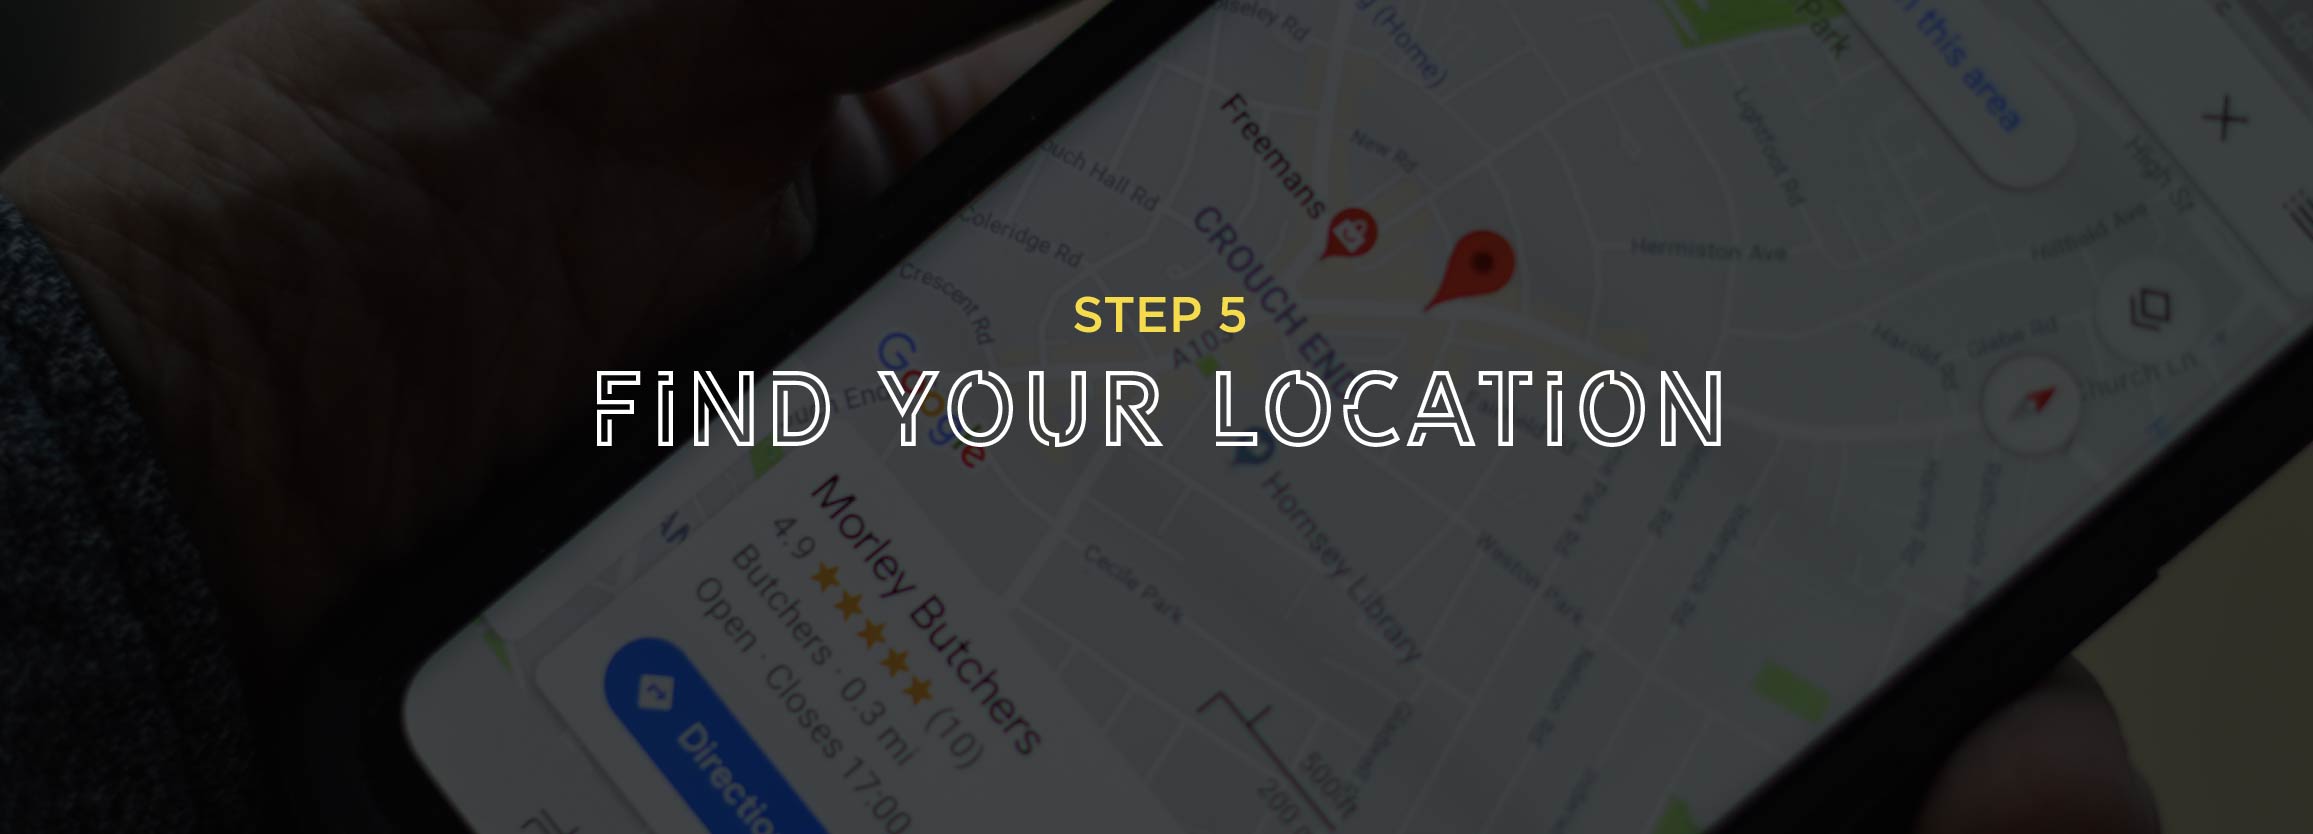 Step 5 - Find your location